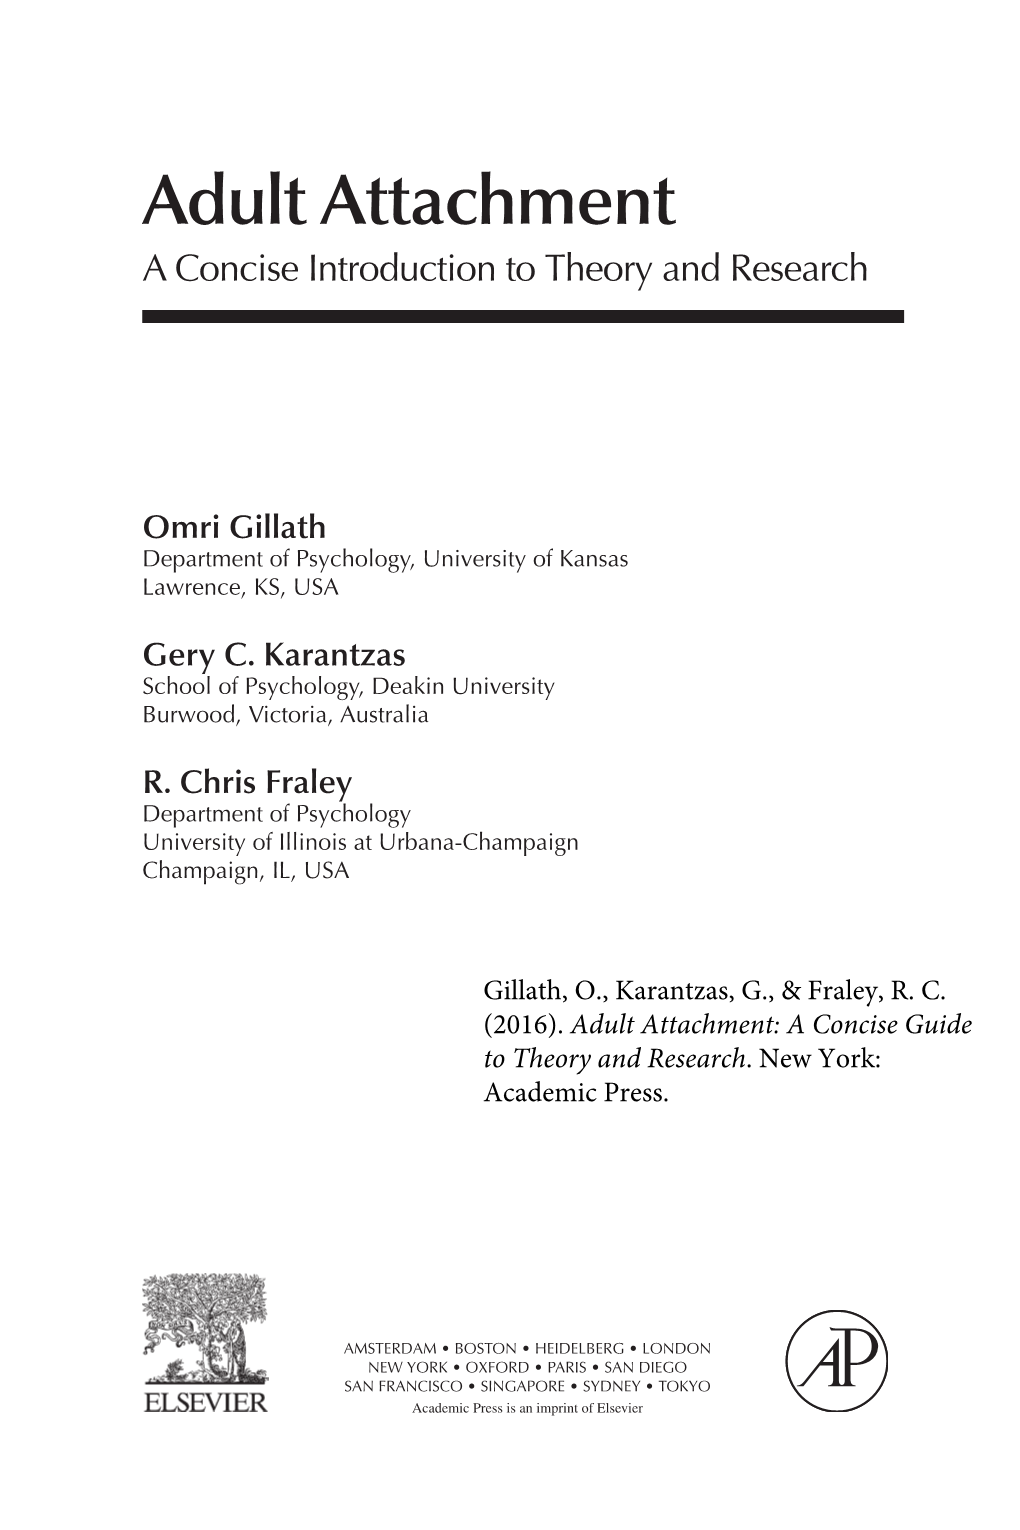 Adult Attachment: a Concise Introduction to Theory and Research